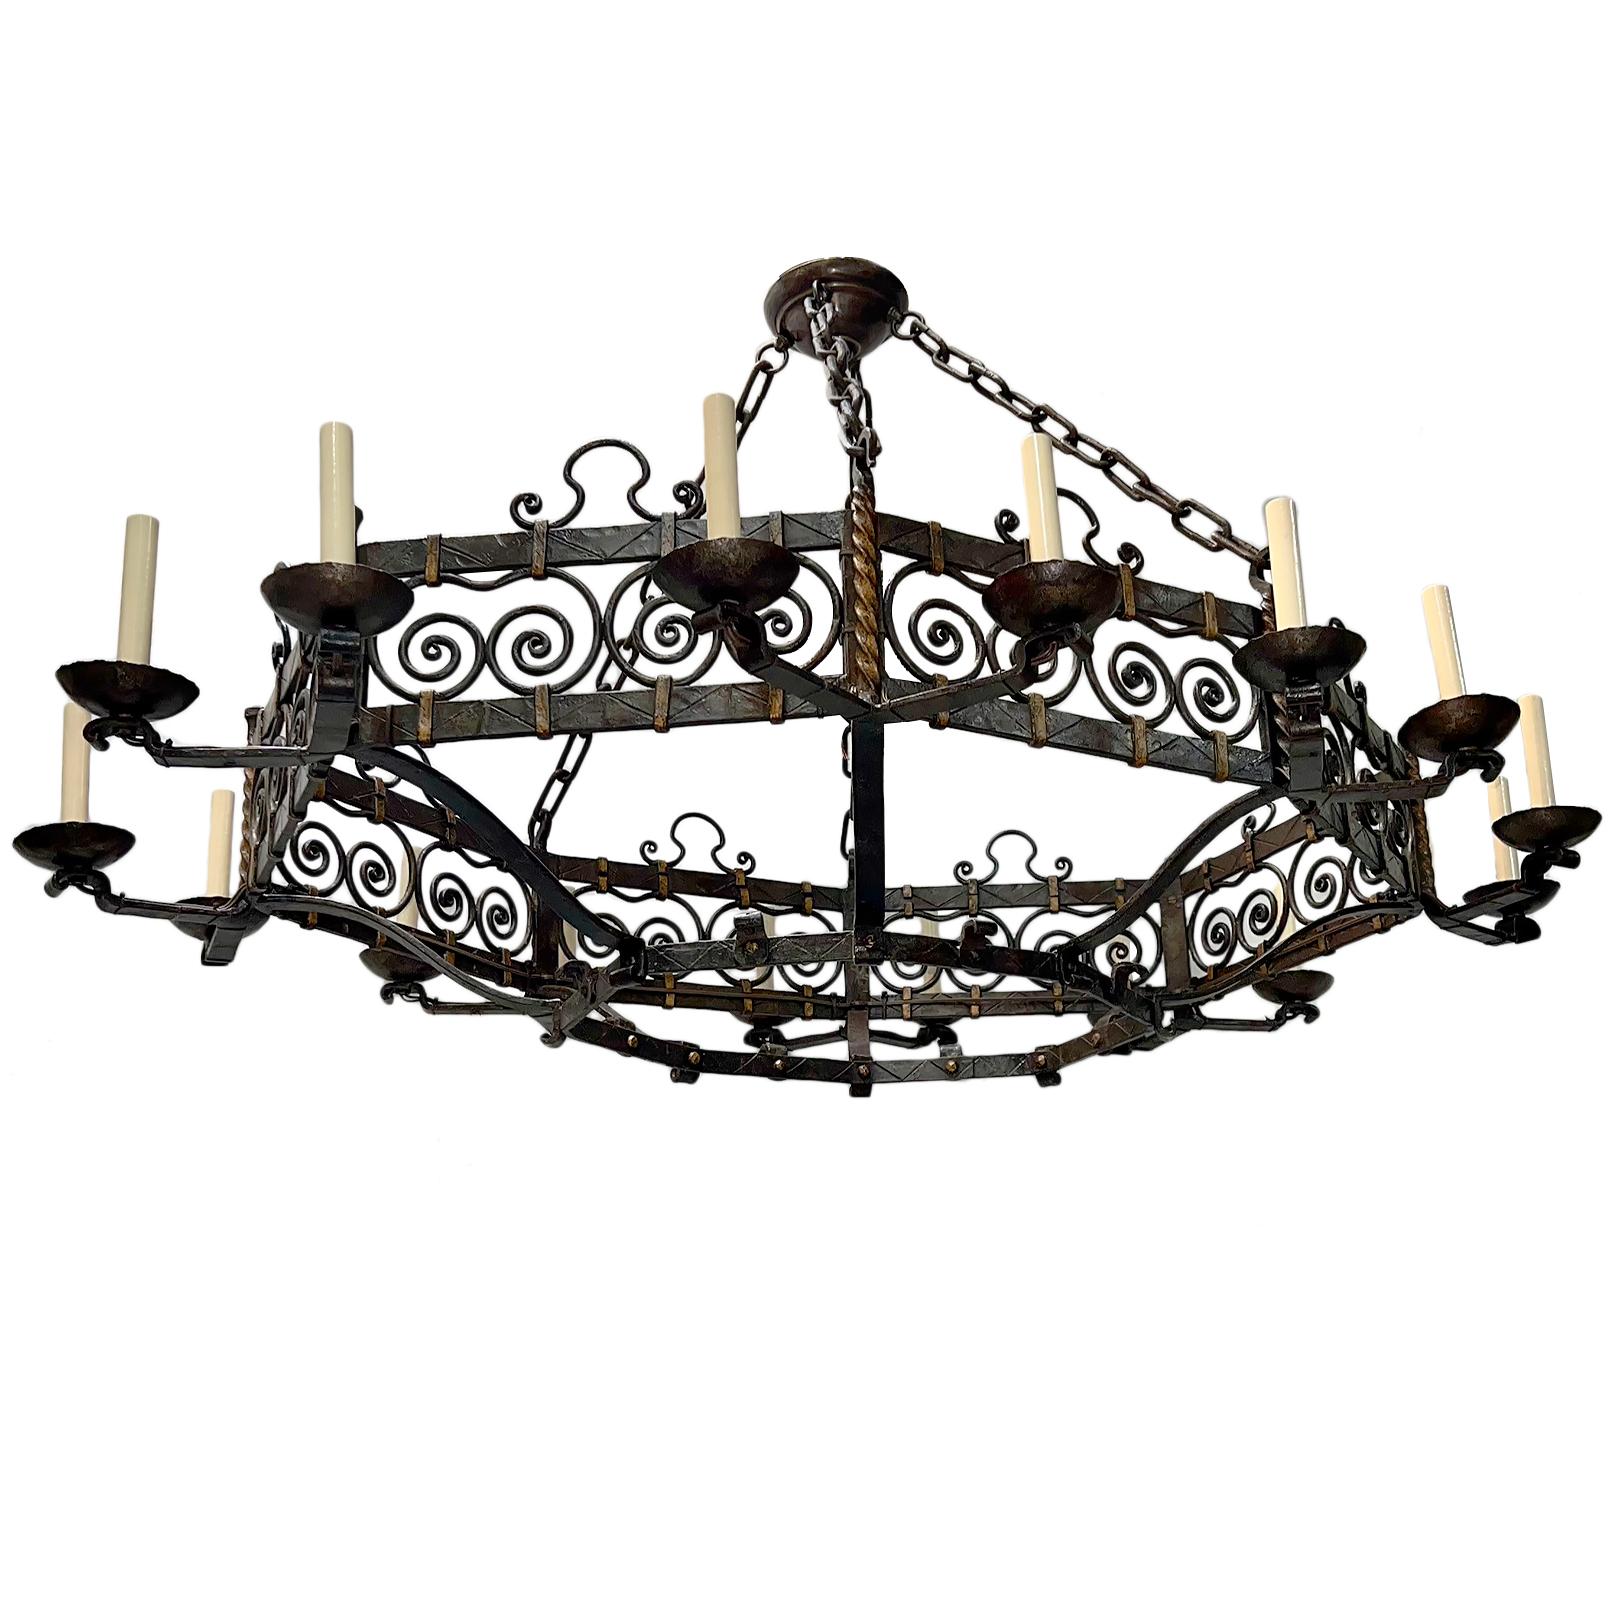 A circa 1950's French iron chandelier with 16 lights.

Measurements:
Drop:33